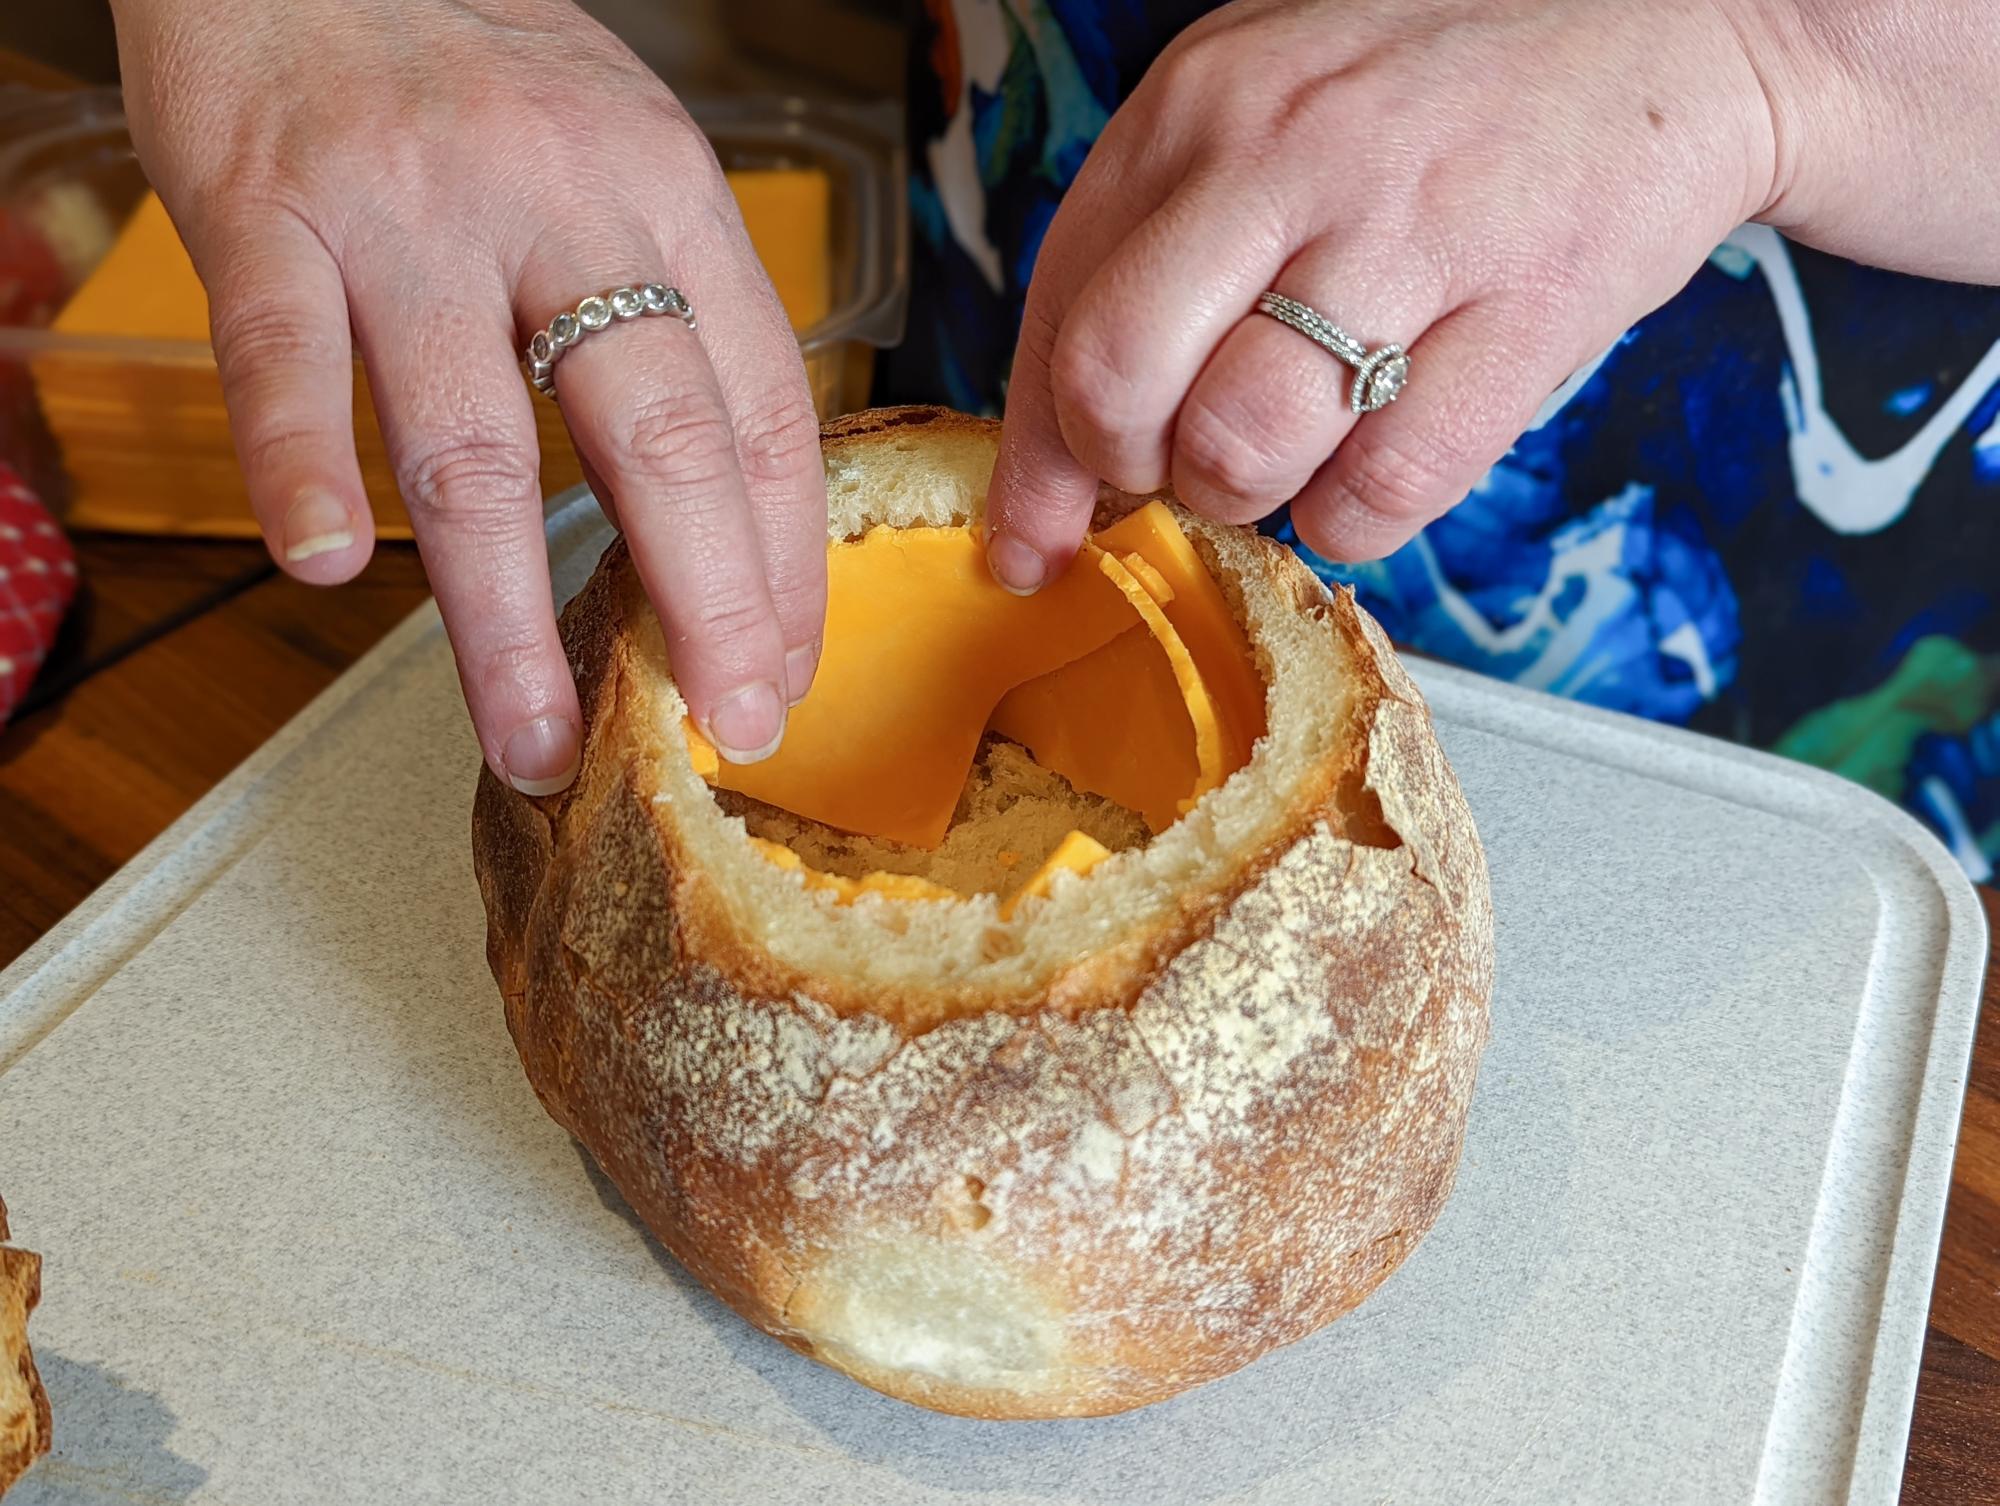 Lining the bread bowl with cheese.